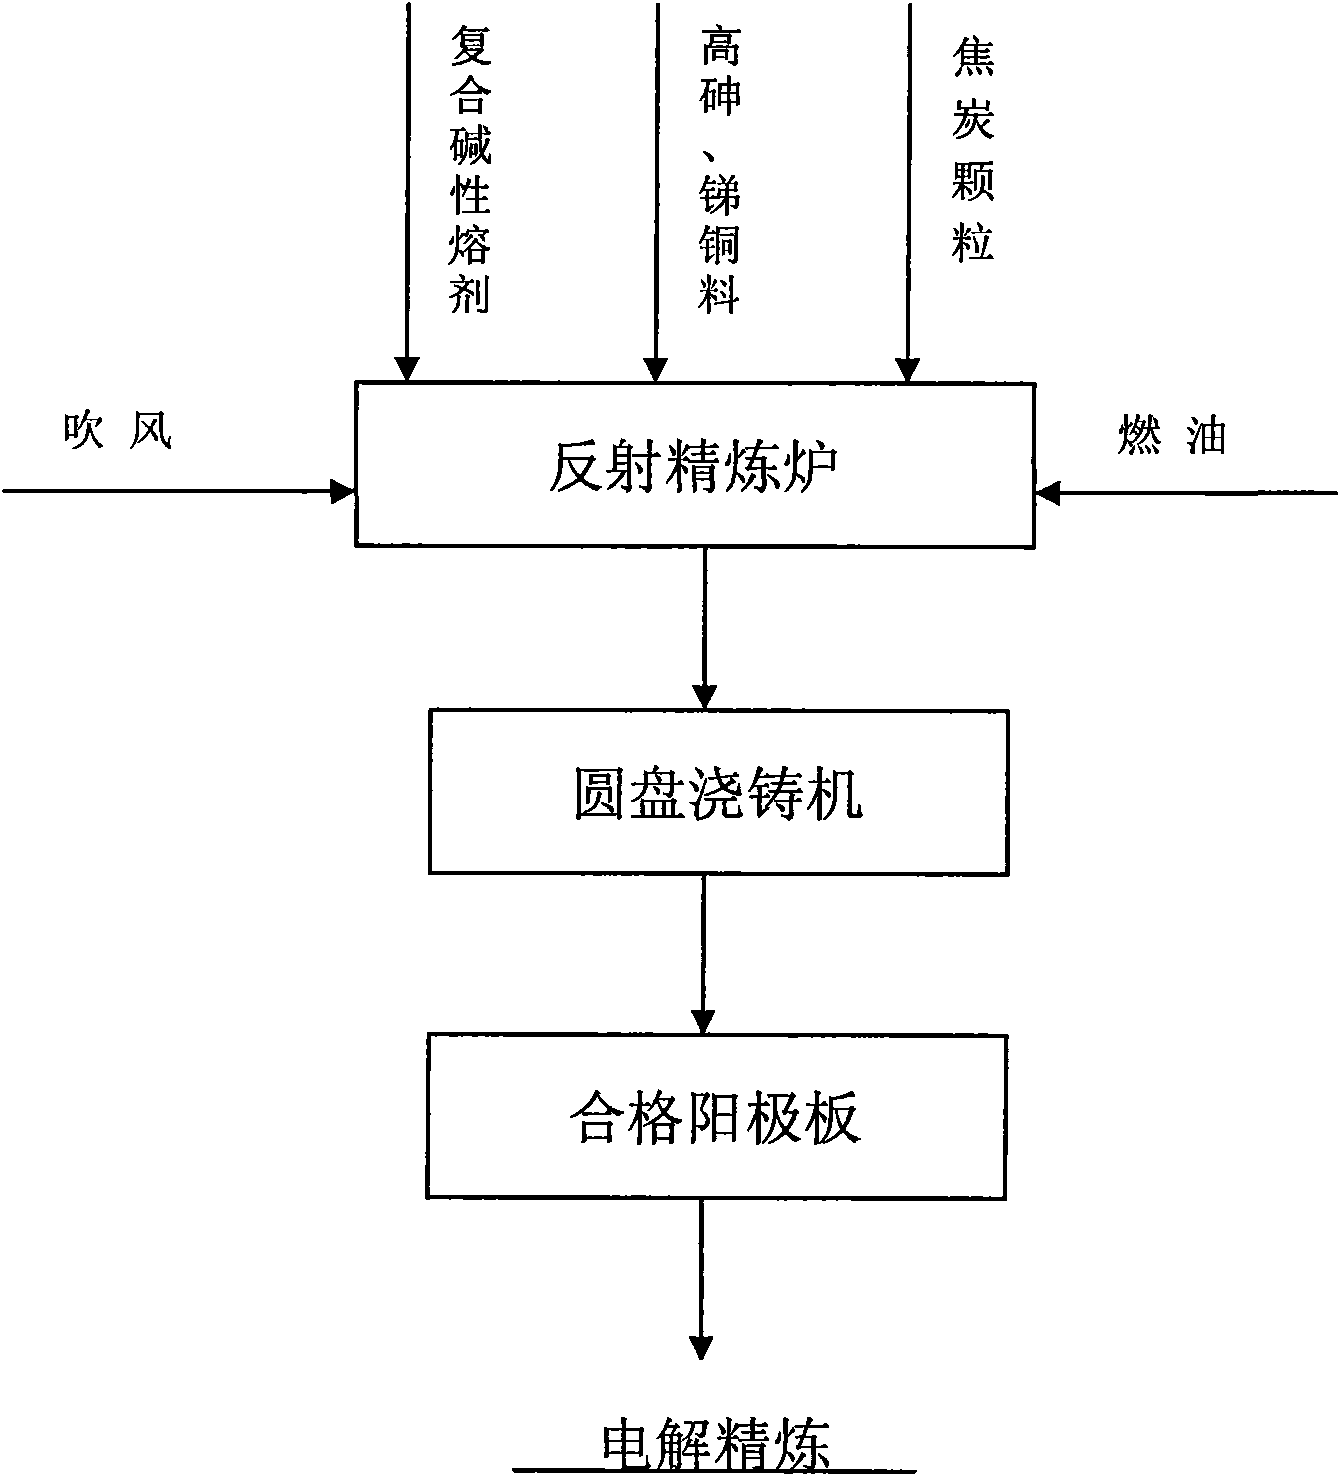 Reverberatory furnace pyrorefining method of crude copper with high arsenic and antimony